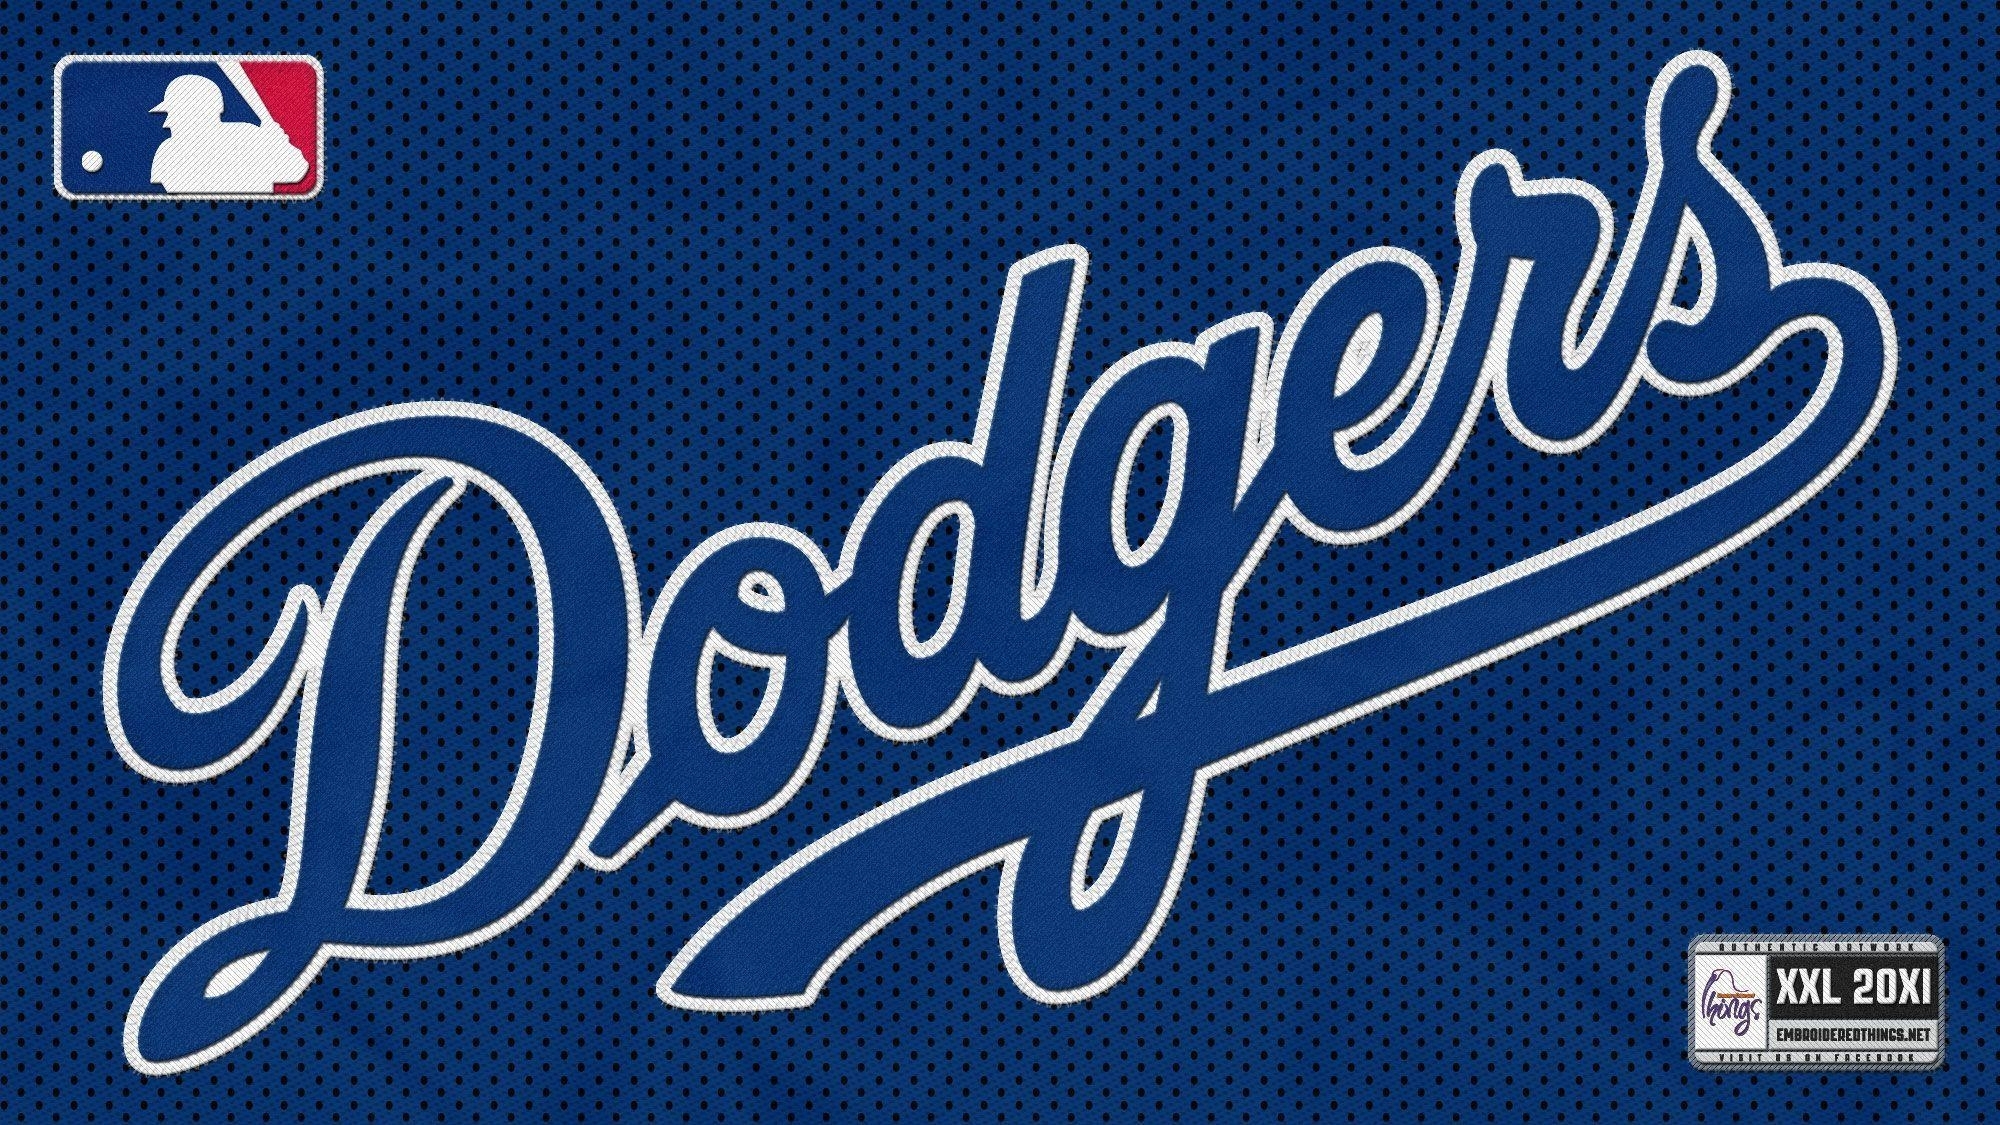 los angeles dodgers 2018 wallpapers wallpaper cave on dodgers 2020 wallpapers